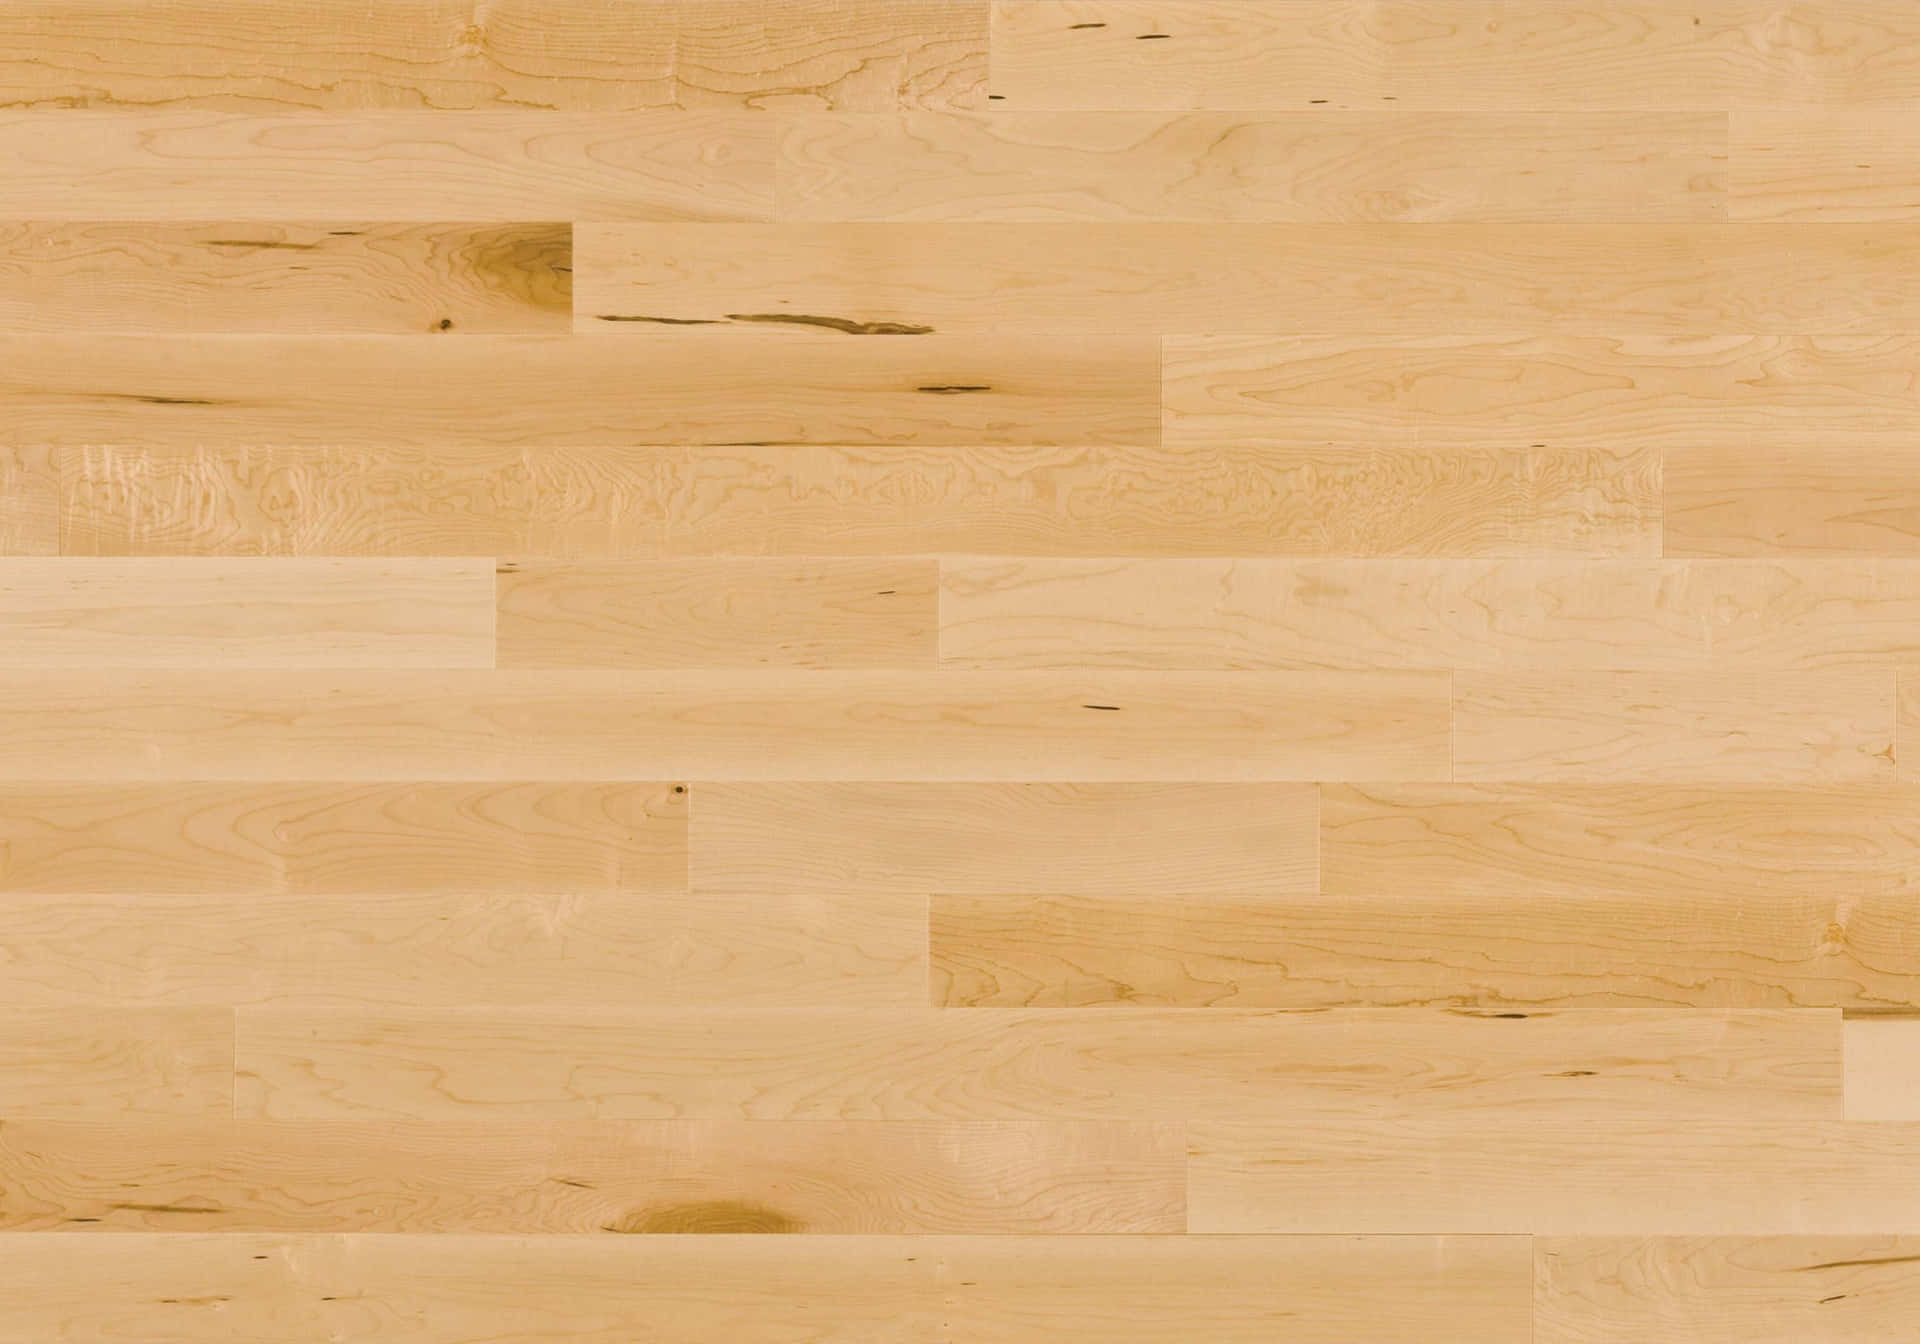 A photograph of a glossy wood floor.